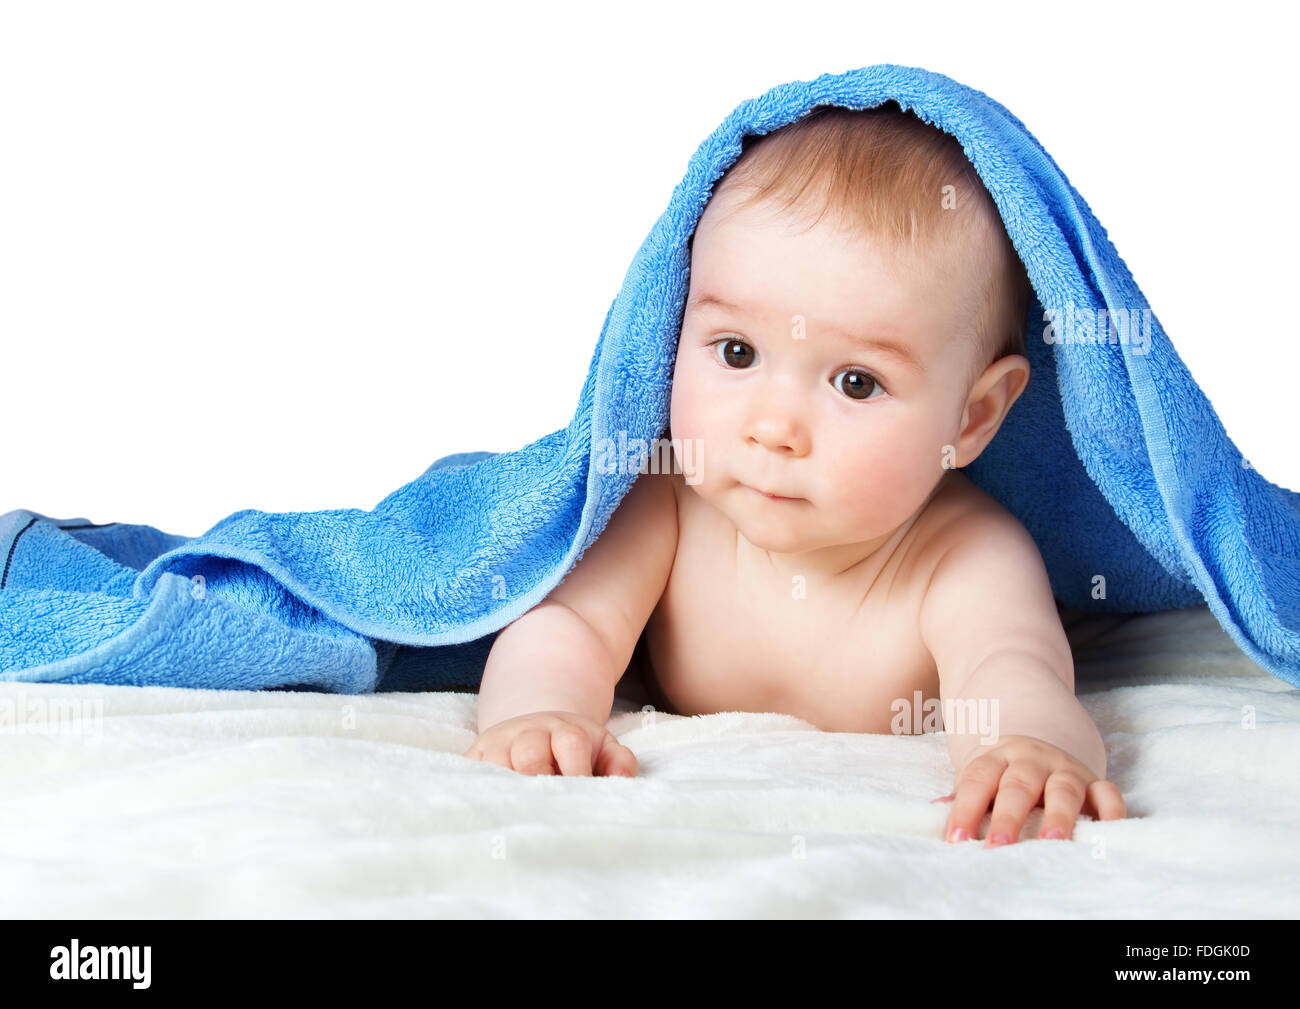 Baby Bath Towel High Resolution Stock Photography and Images - Alamy